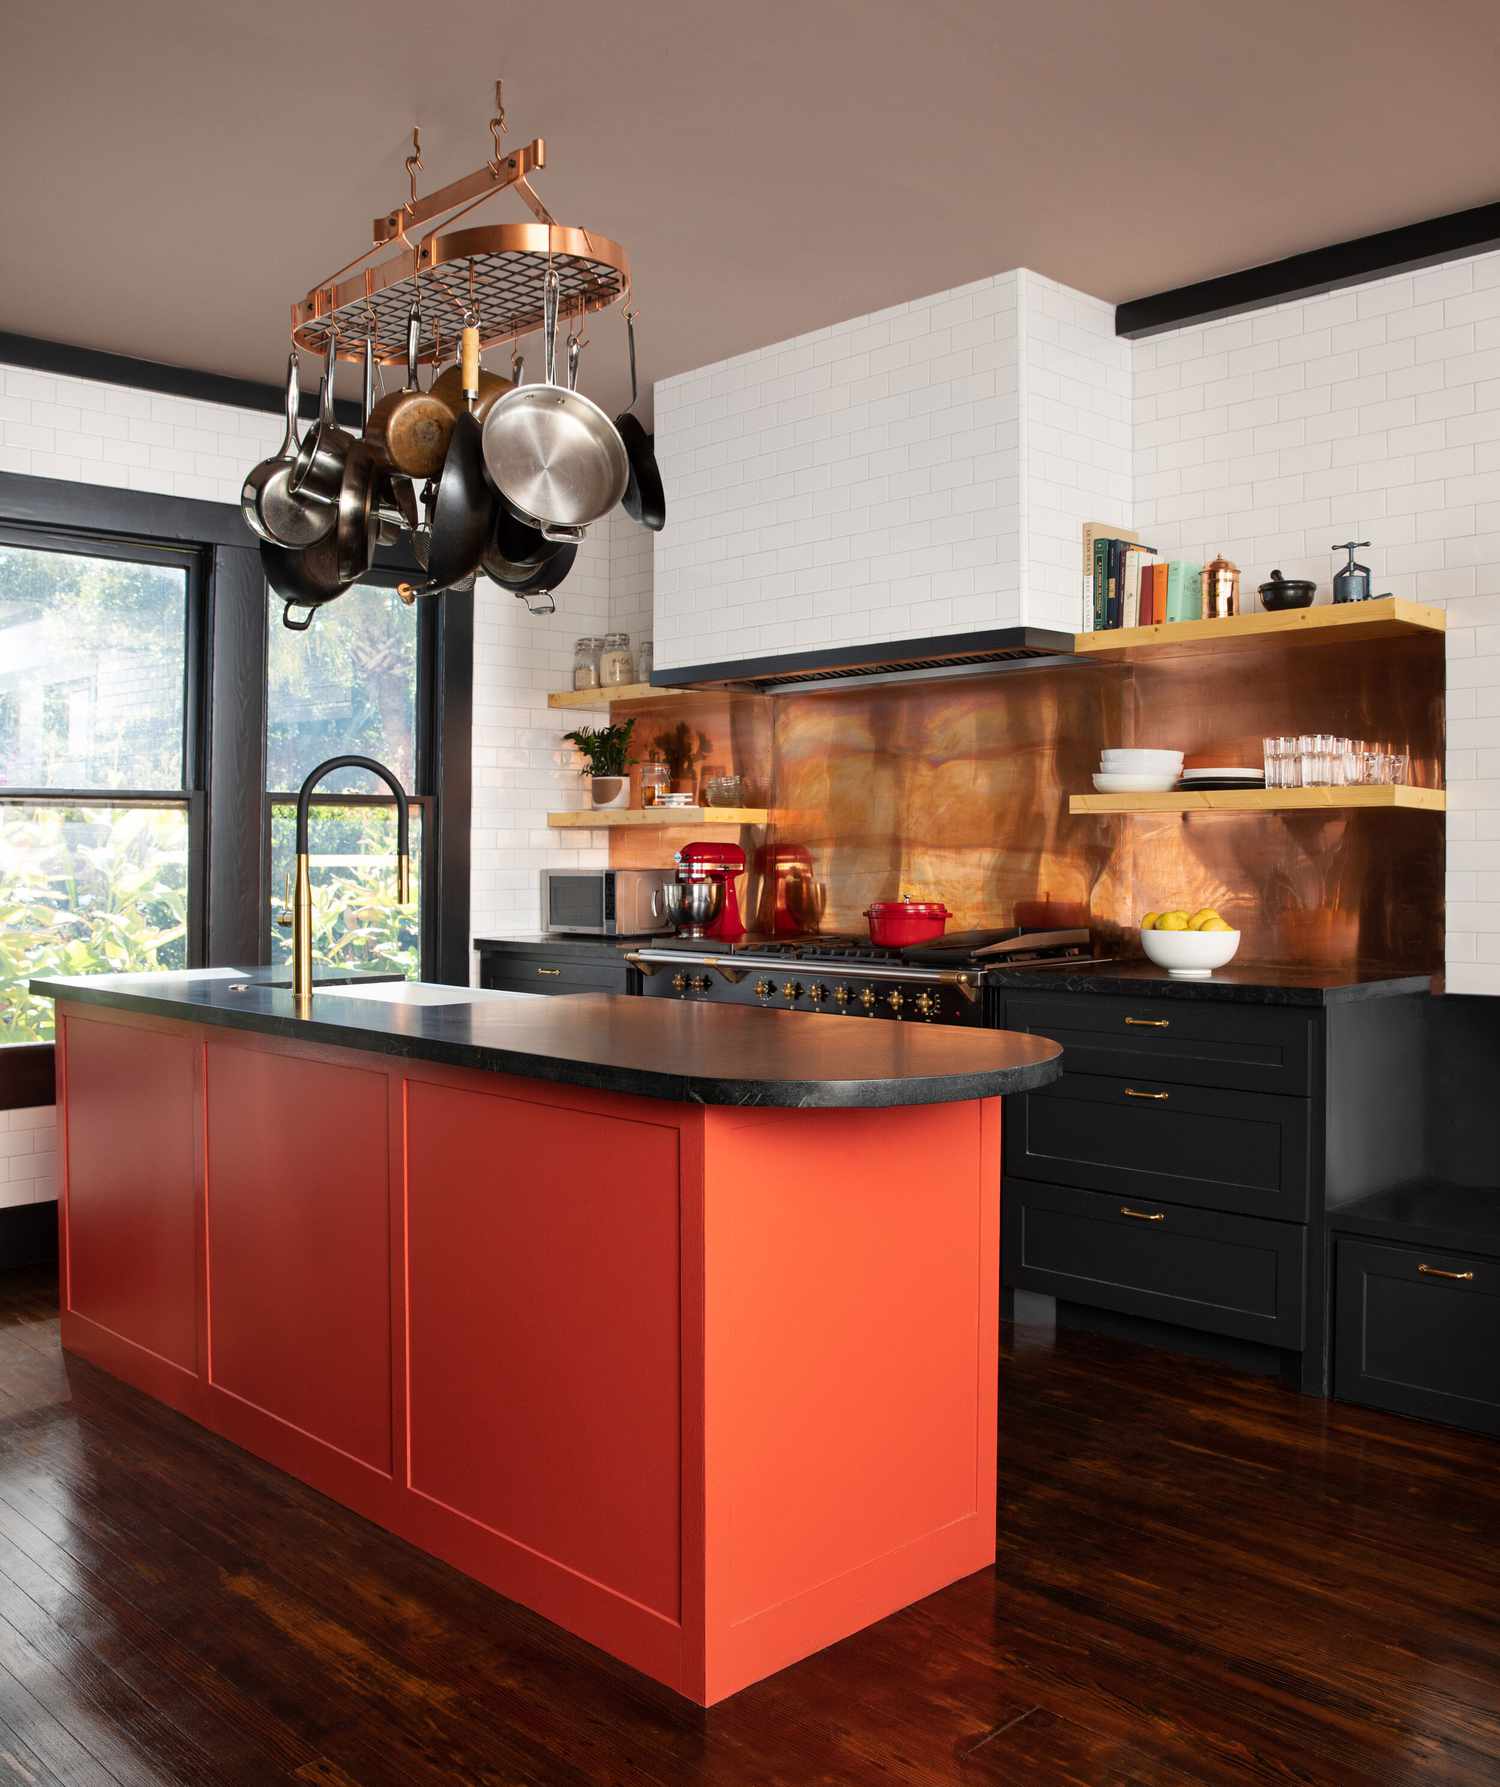 Red and copper kitchen by Mary Patton Design